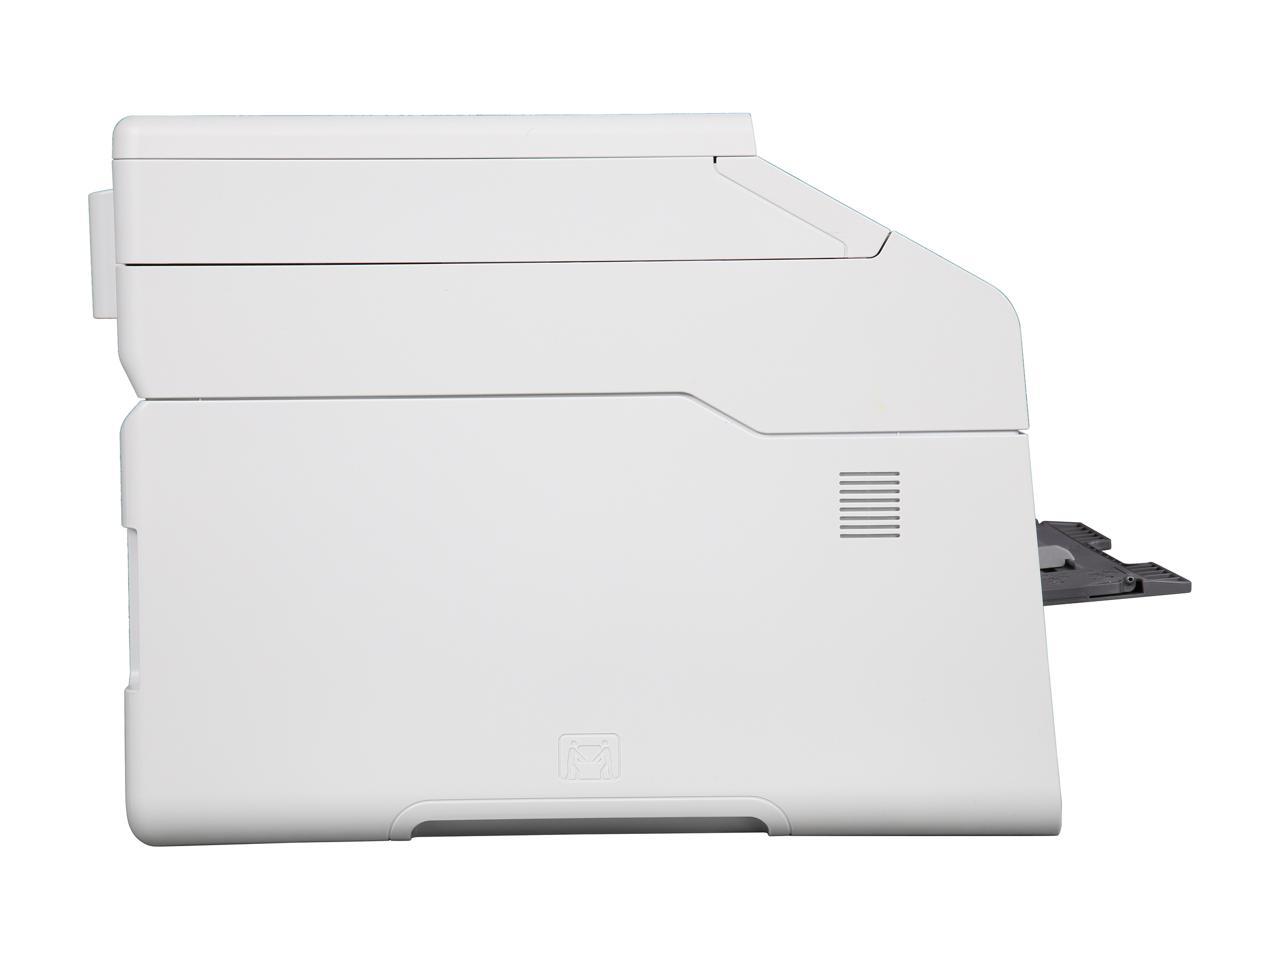 Brother HL-3180CDW Duplex Wireless / USB Color Laser Printer with Convenience Copying and Scanning